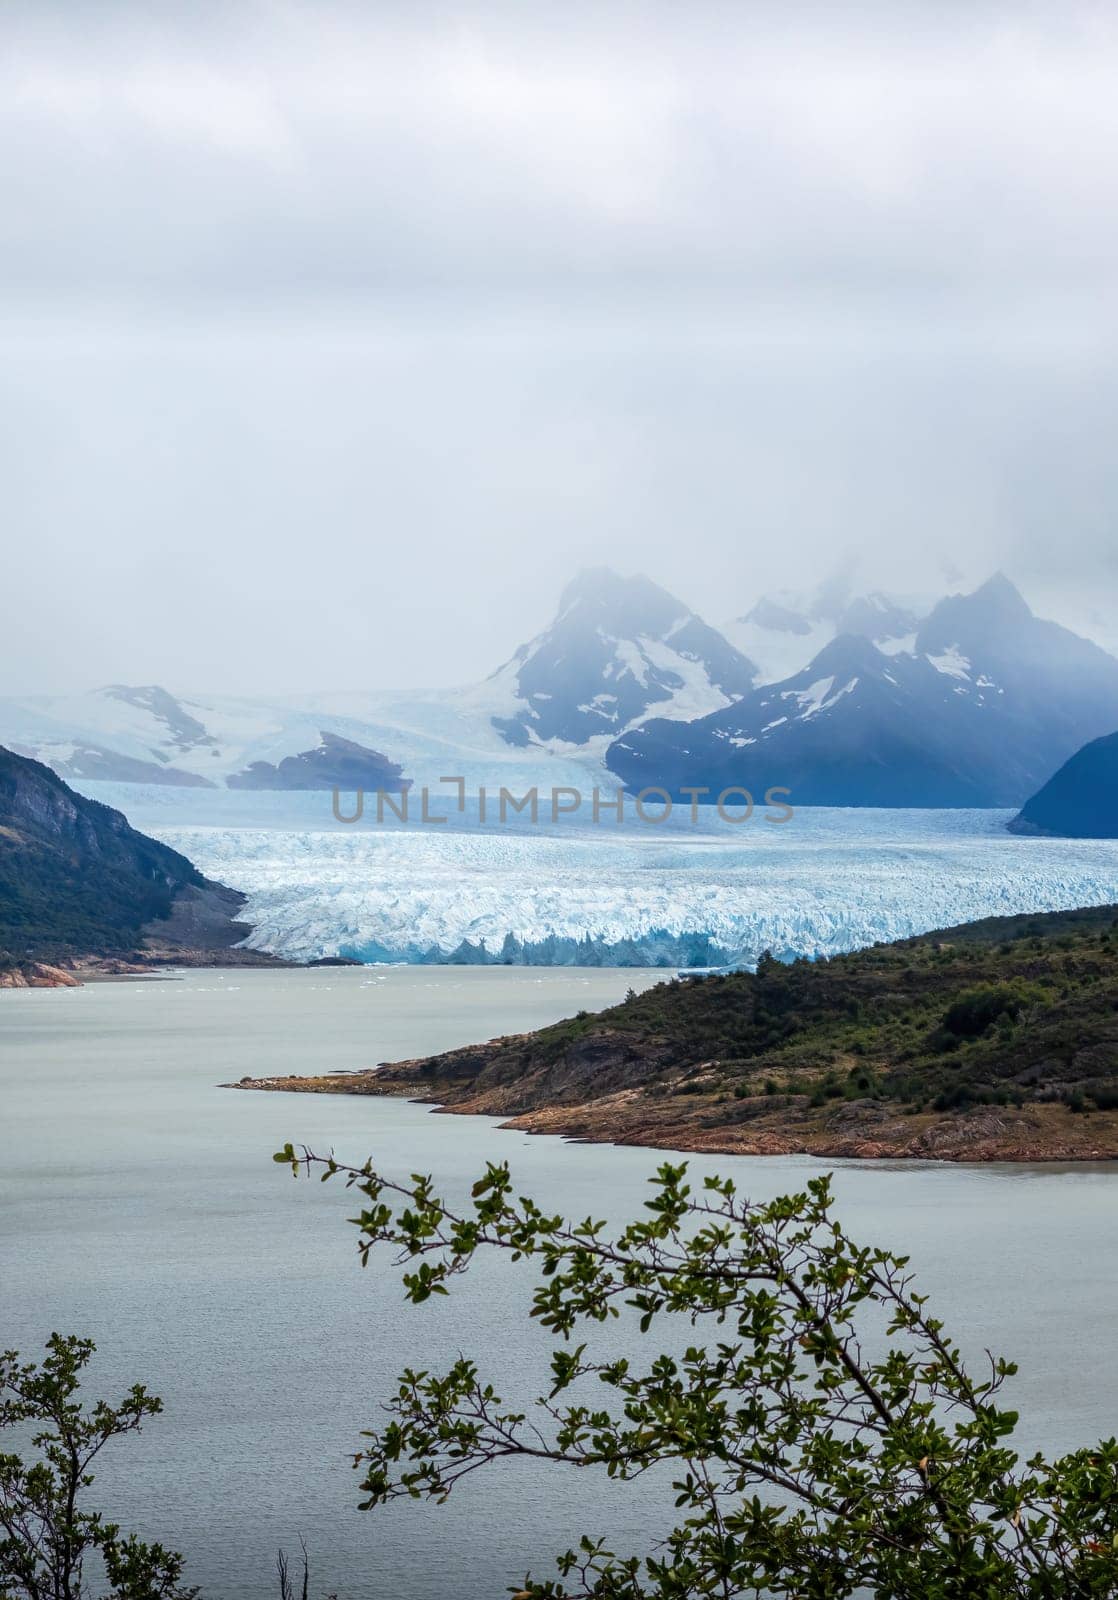 Majestic Glacier View Over the Lake with Mountain Peaks by FerradalFCG